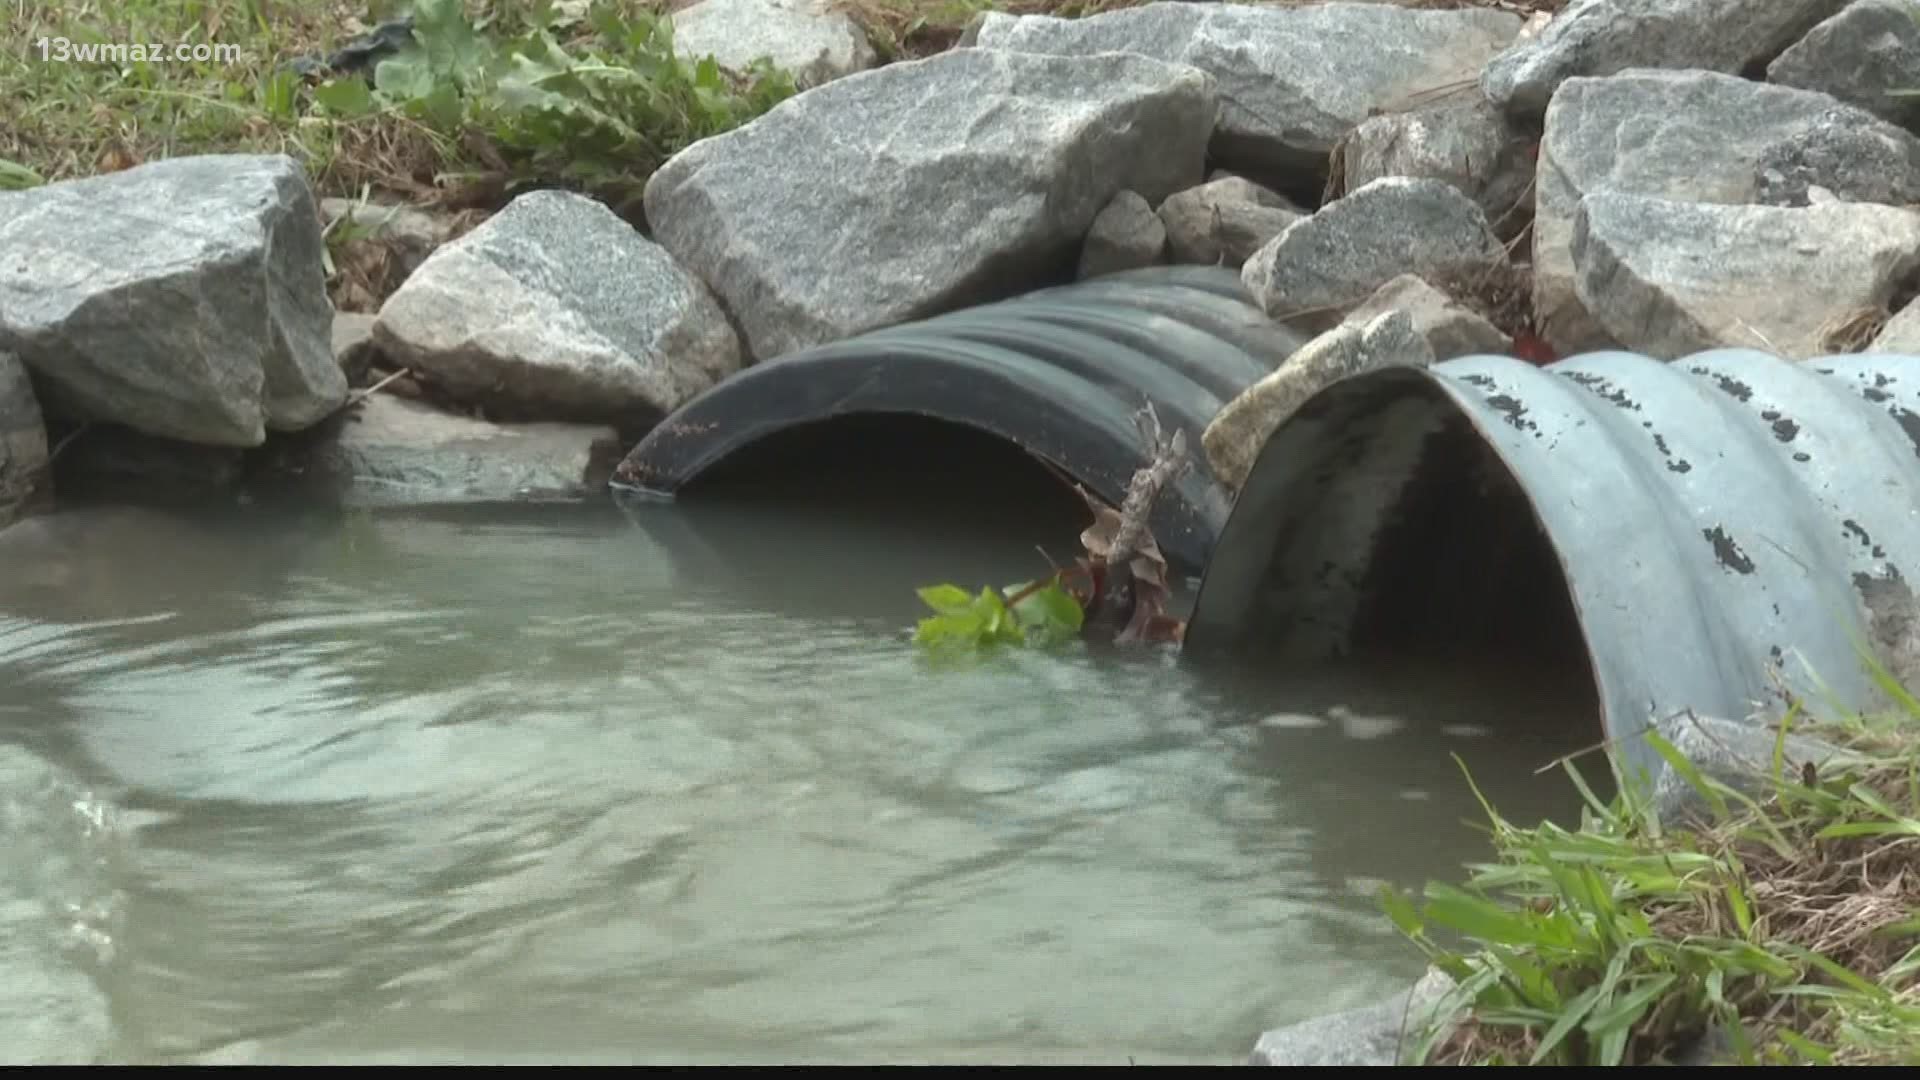 Houston County and the City of Warner Robins recently partnered to take a look at drainage issues.